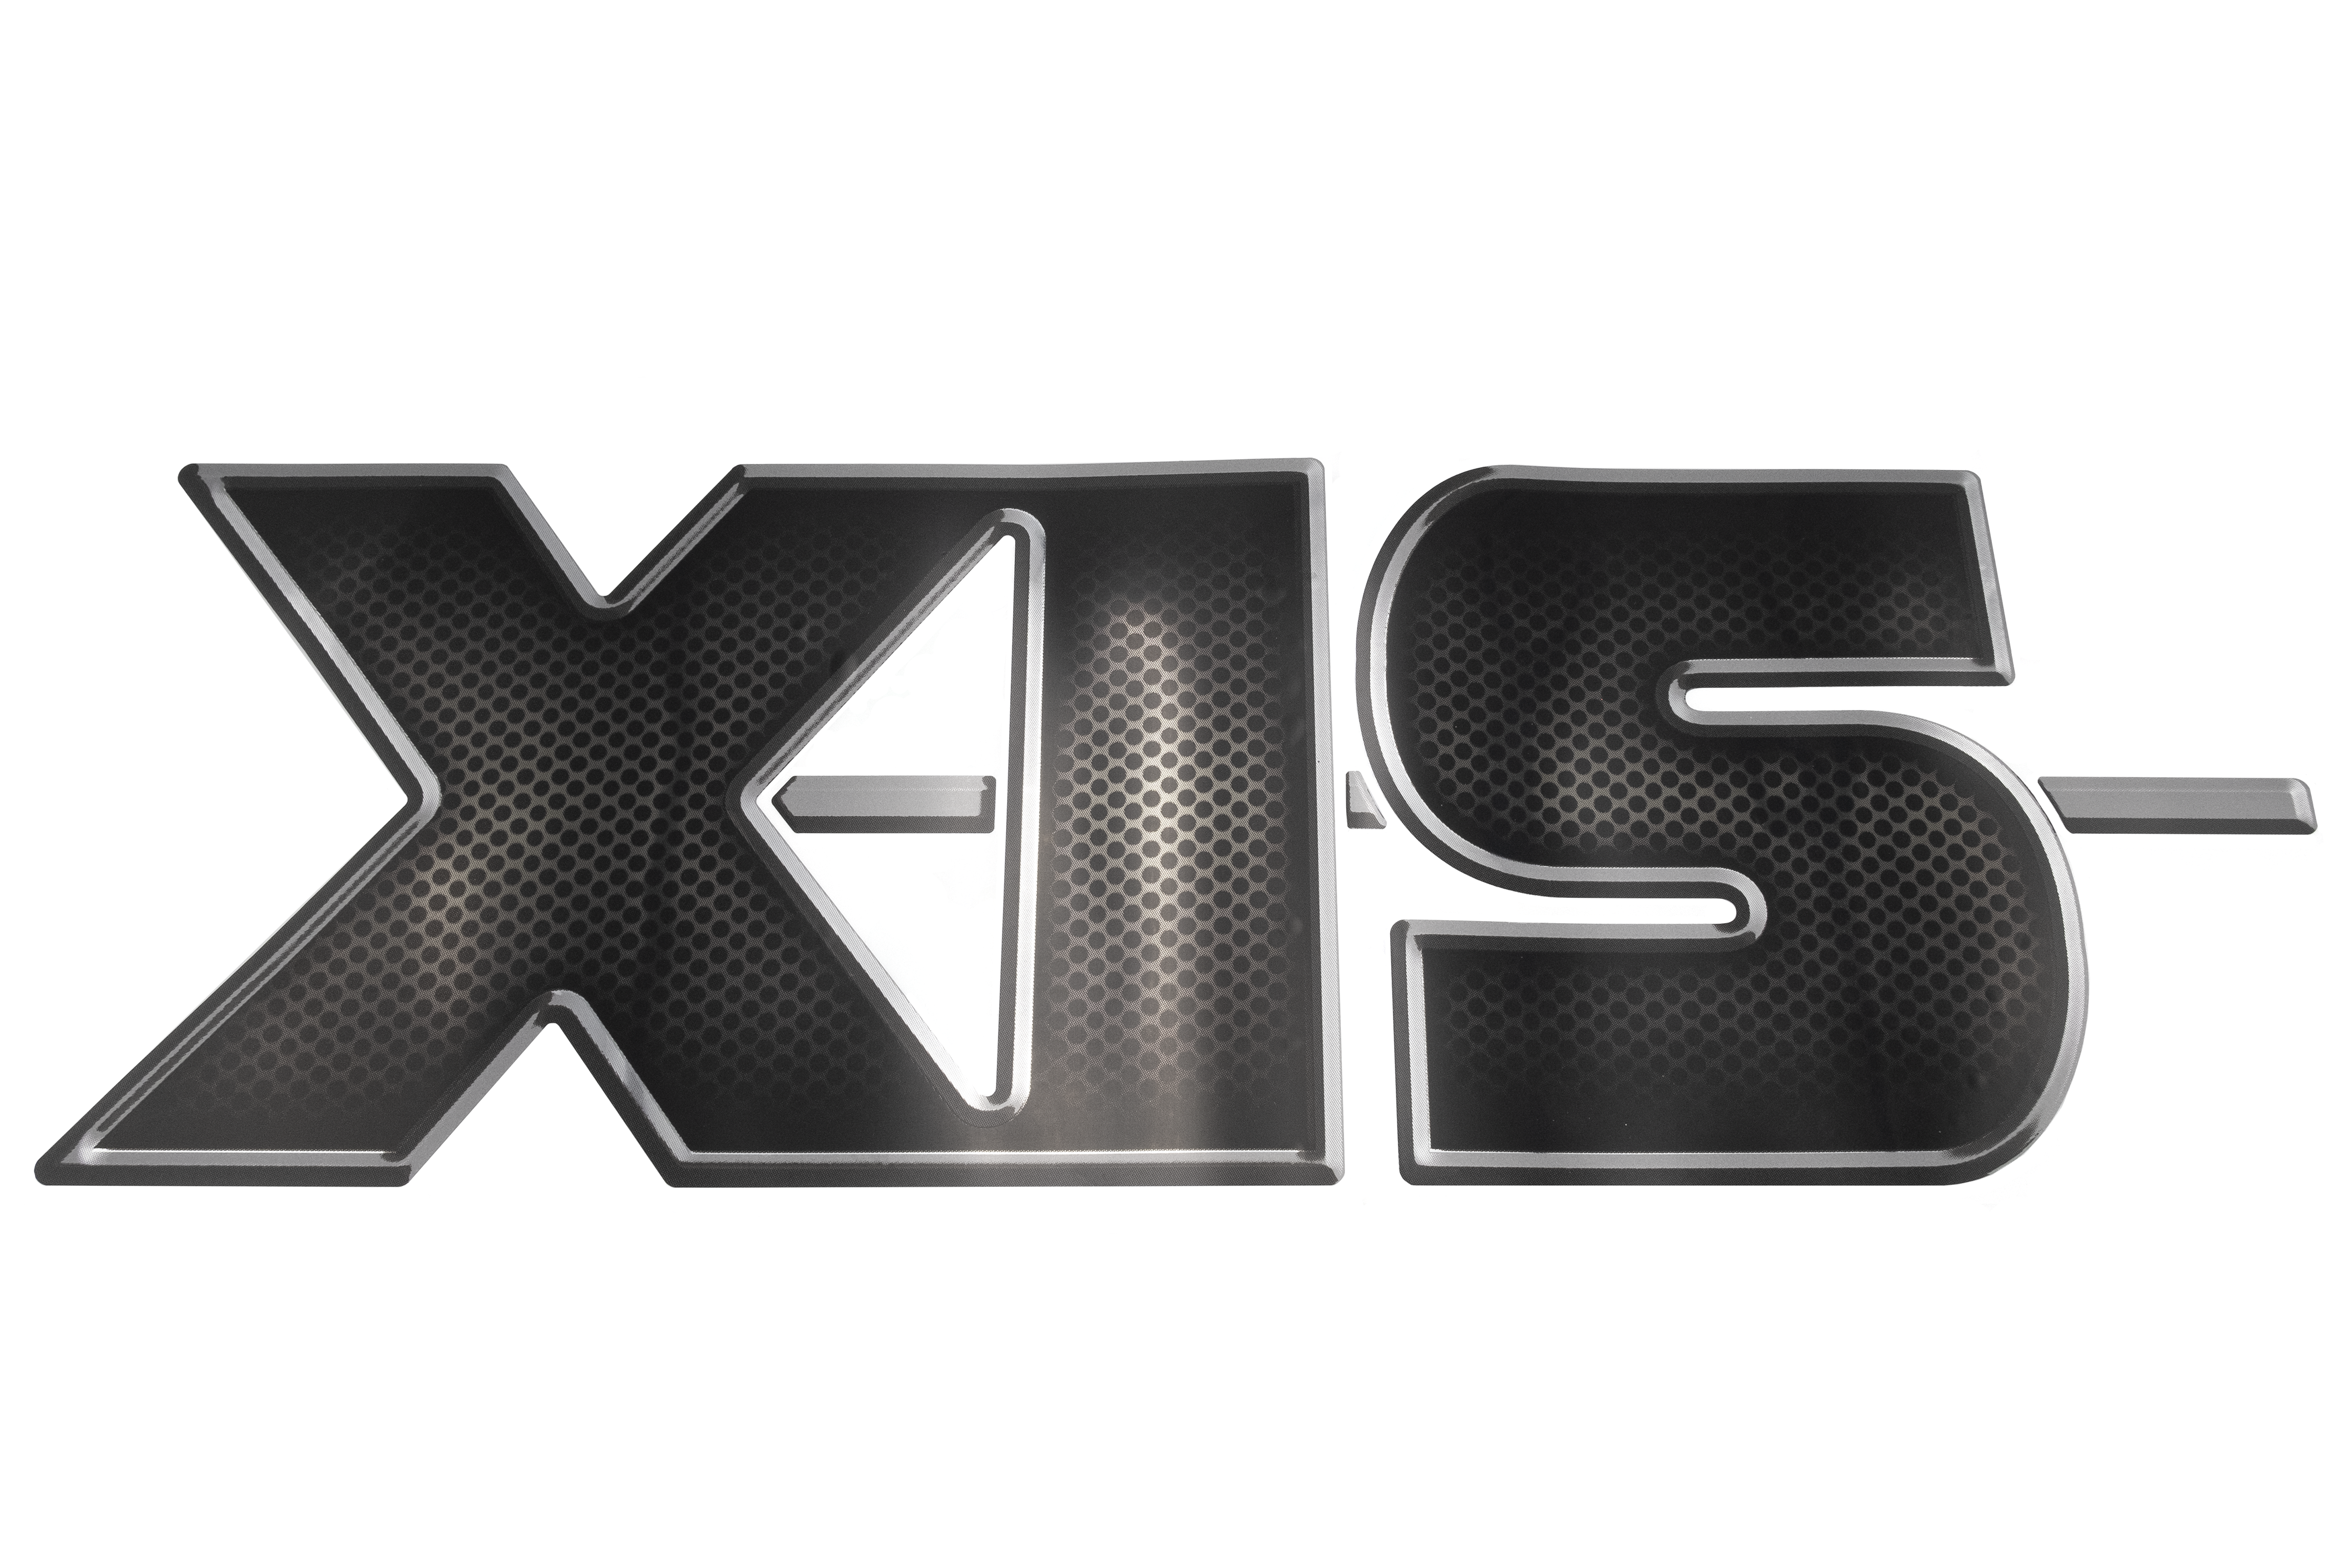 Axis "XIS" Decal